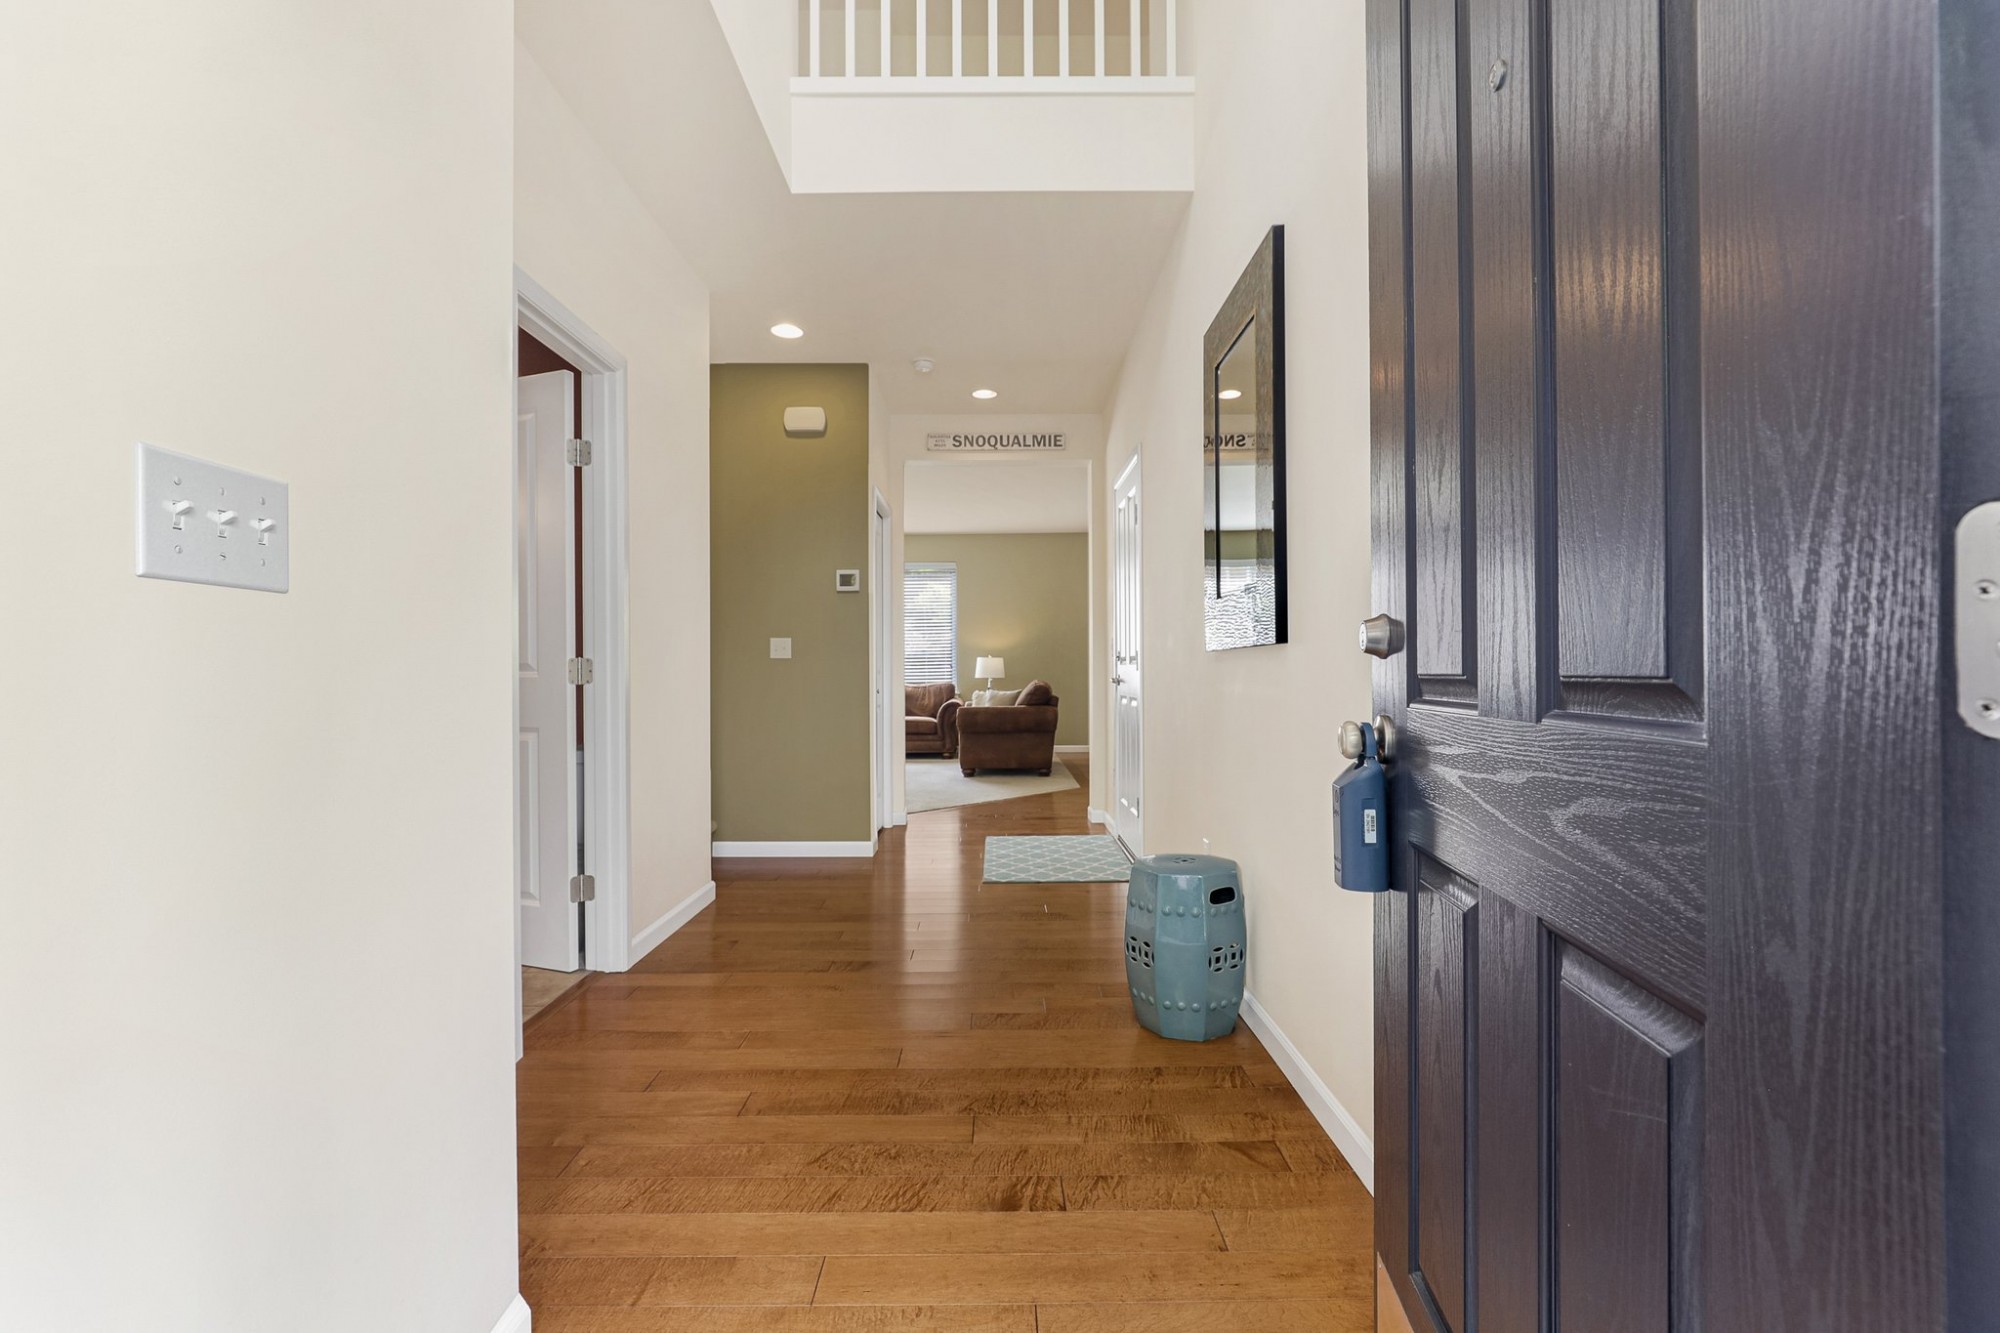 Large Entry with hardwood floors is perfect for welcoming guests.